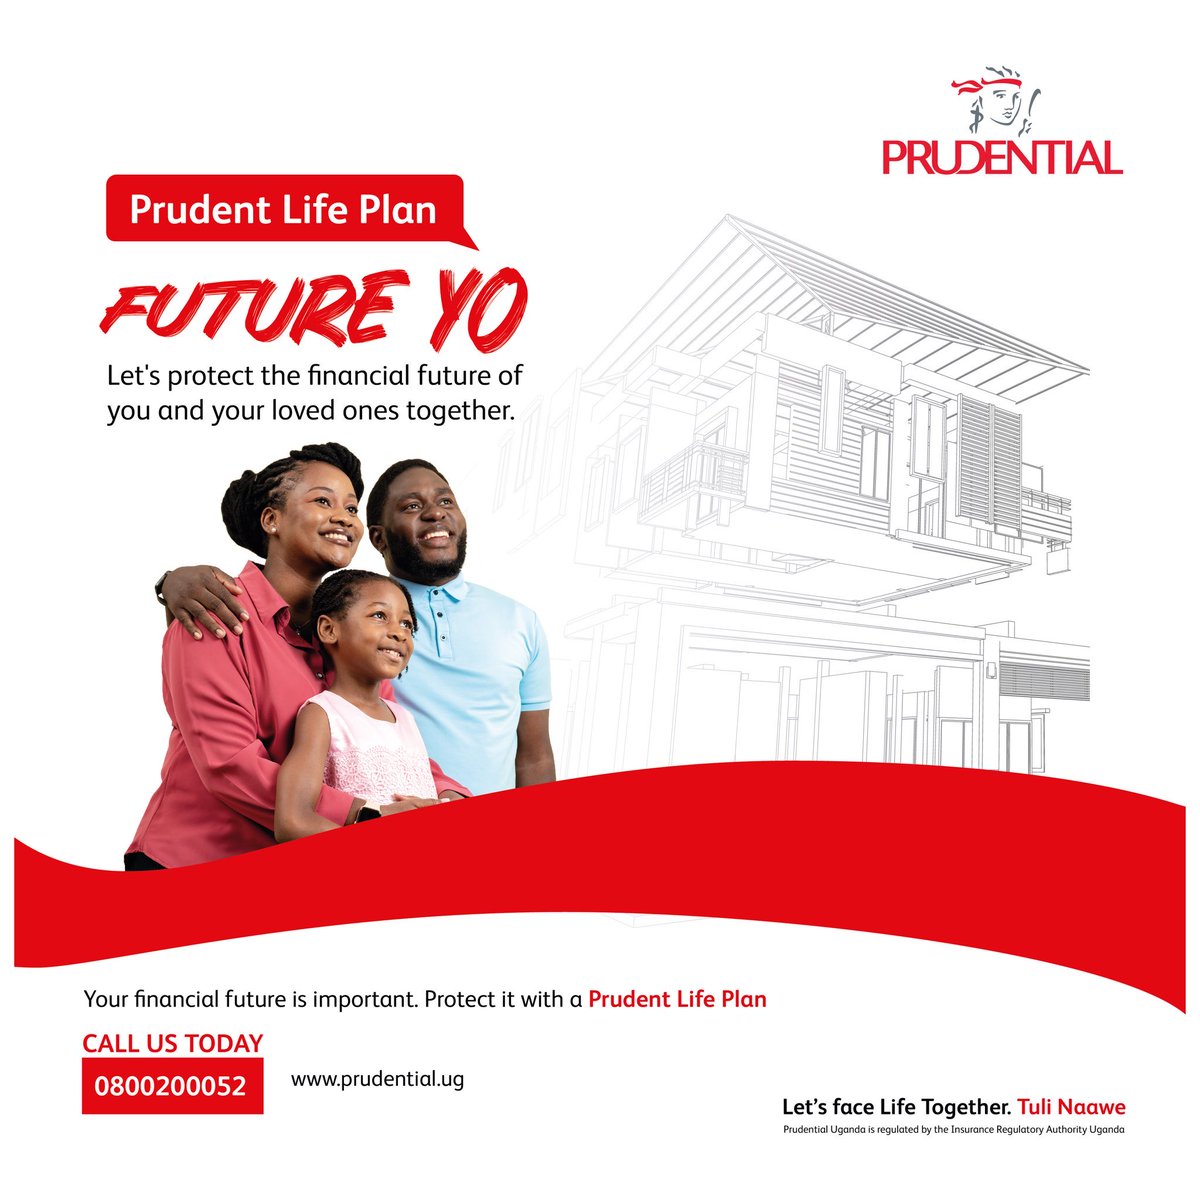 Ready to break free from financial uncertainty? Prudent Life Plan is here to help! The expert guidance will empower you to achieve financial stability and secure a brighter future. Don't wait - connect with Prudential today and start building the financial freedom you deserve.…